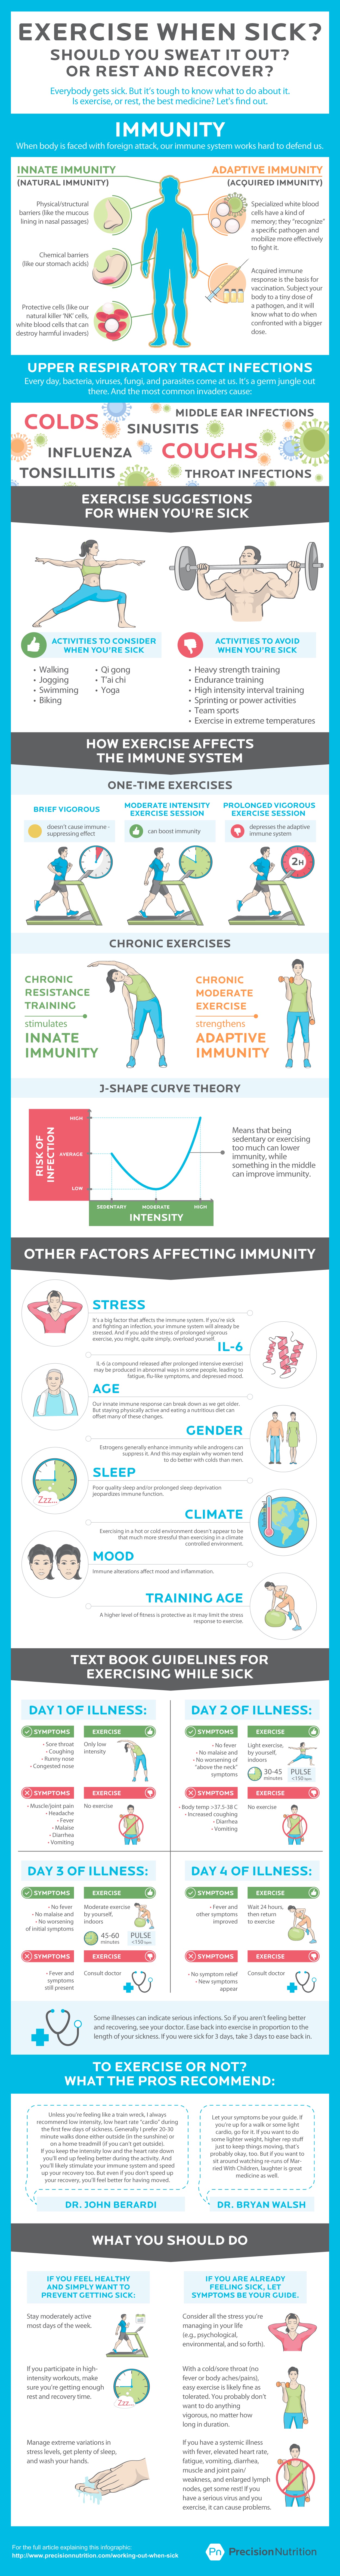 Should I Workout If I Am Sick - Infographic